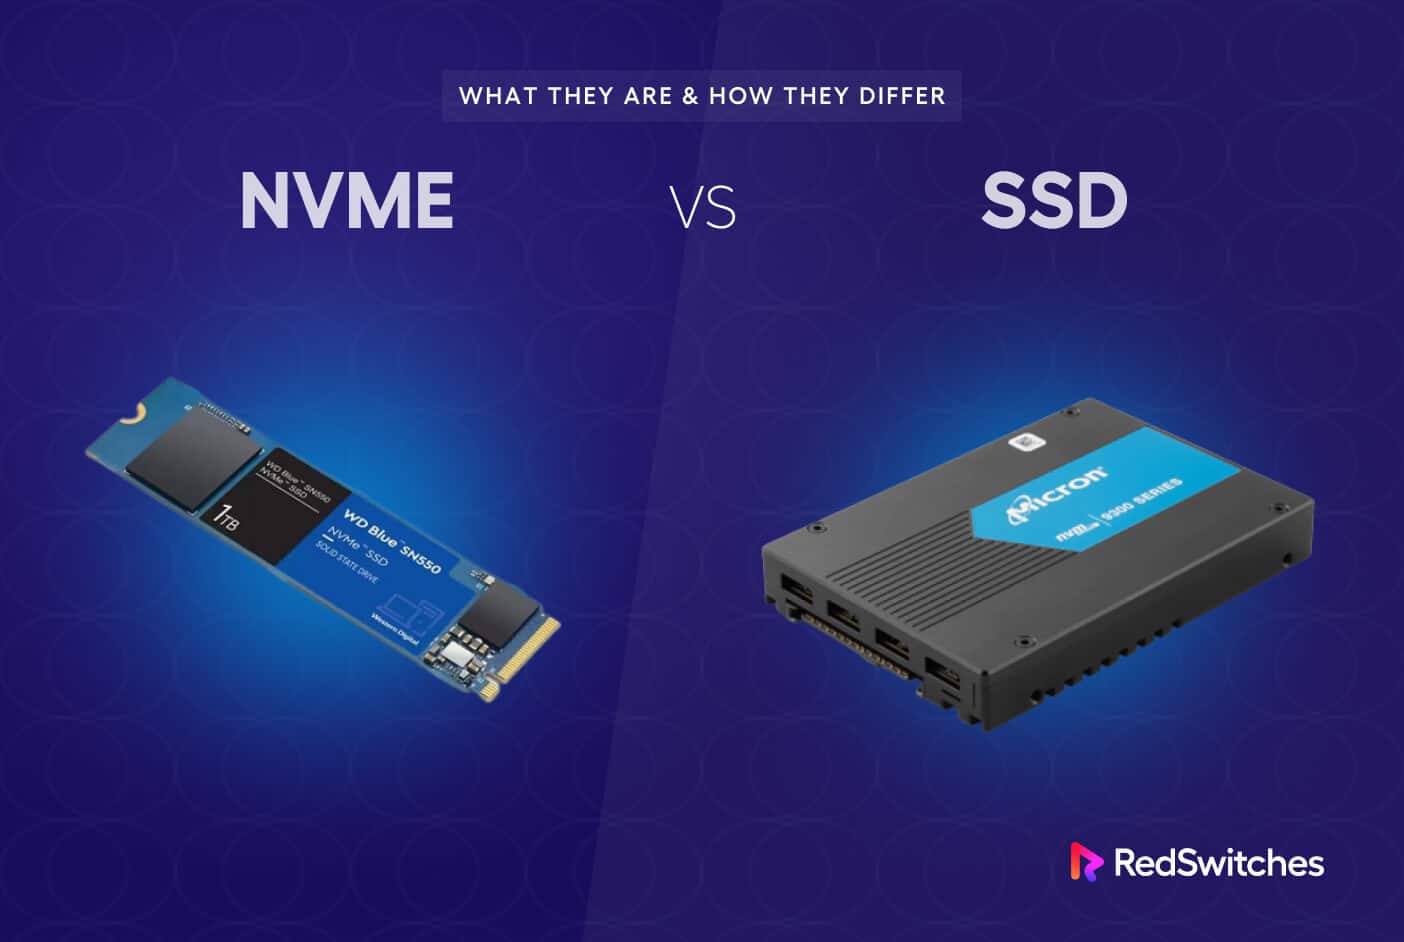 NVMe vs SSD - What's The Difference?